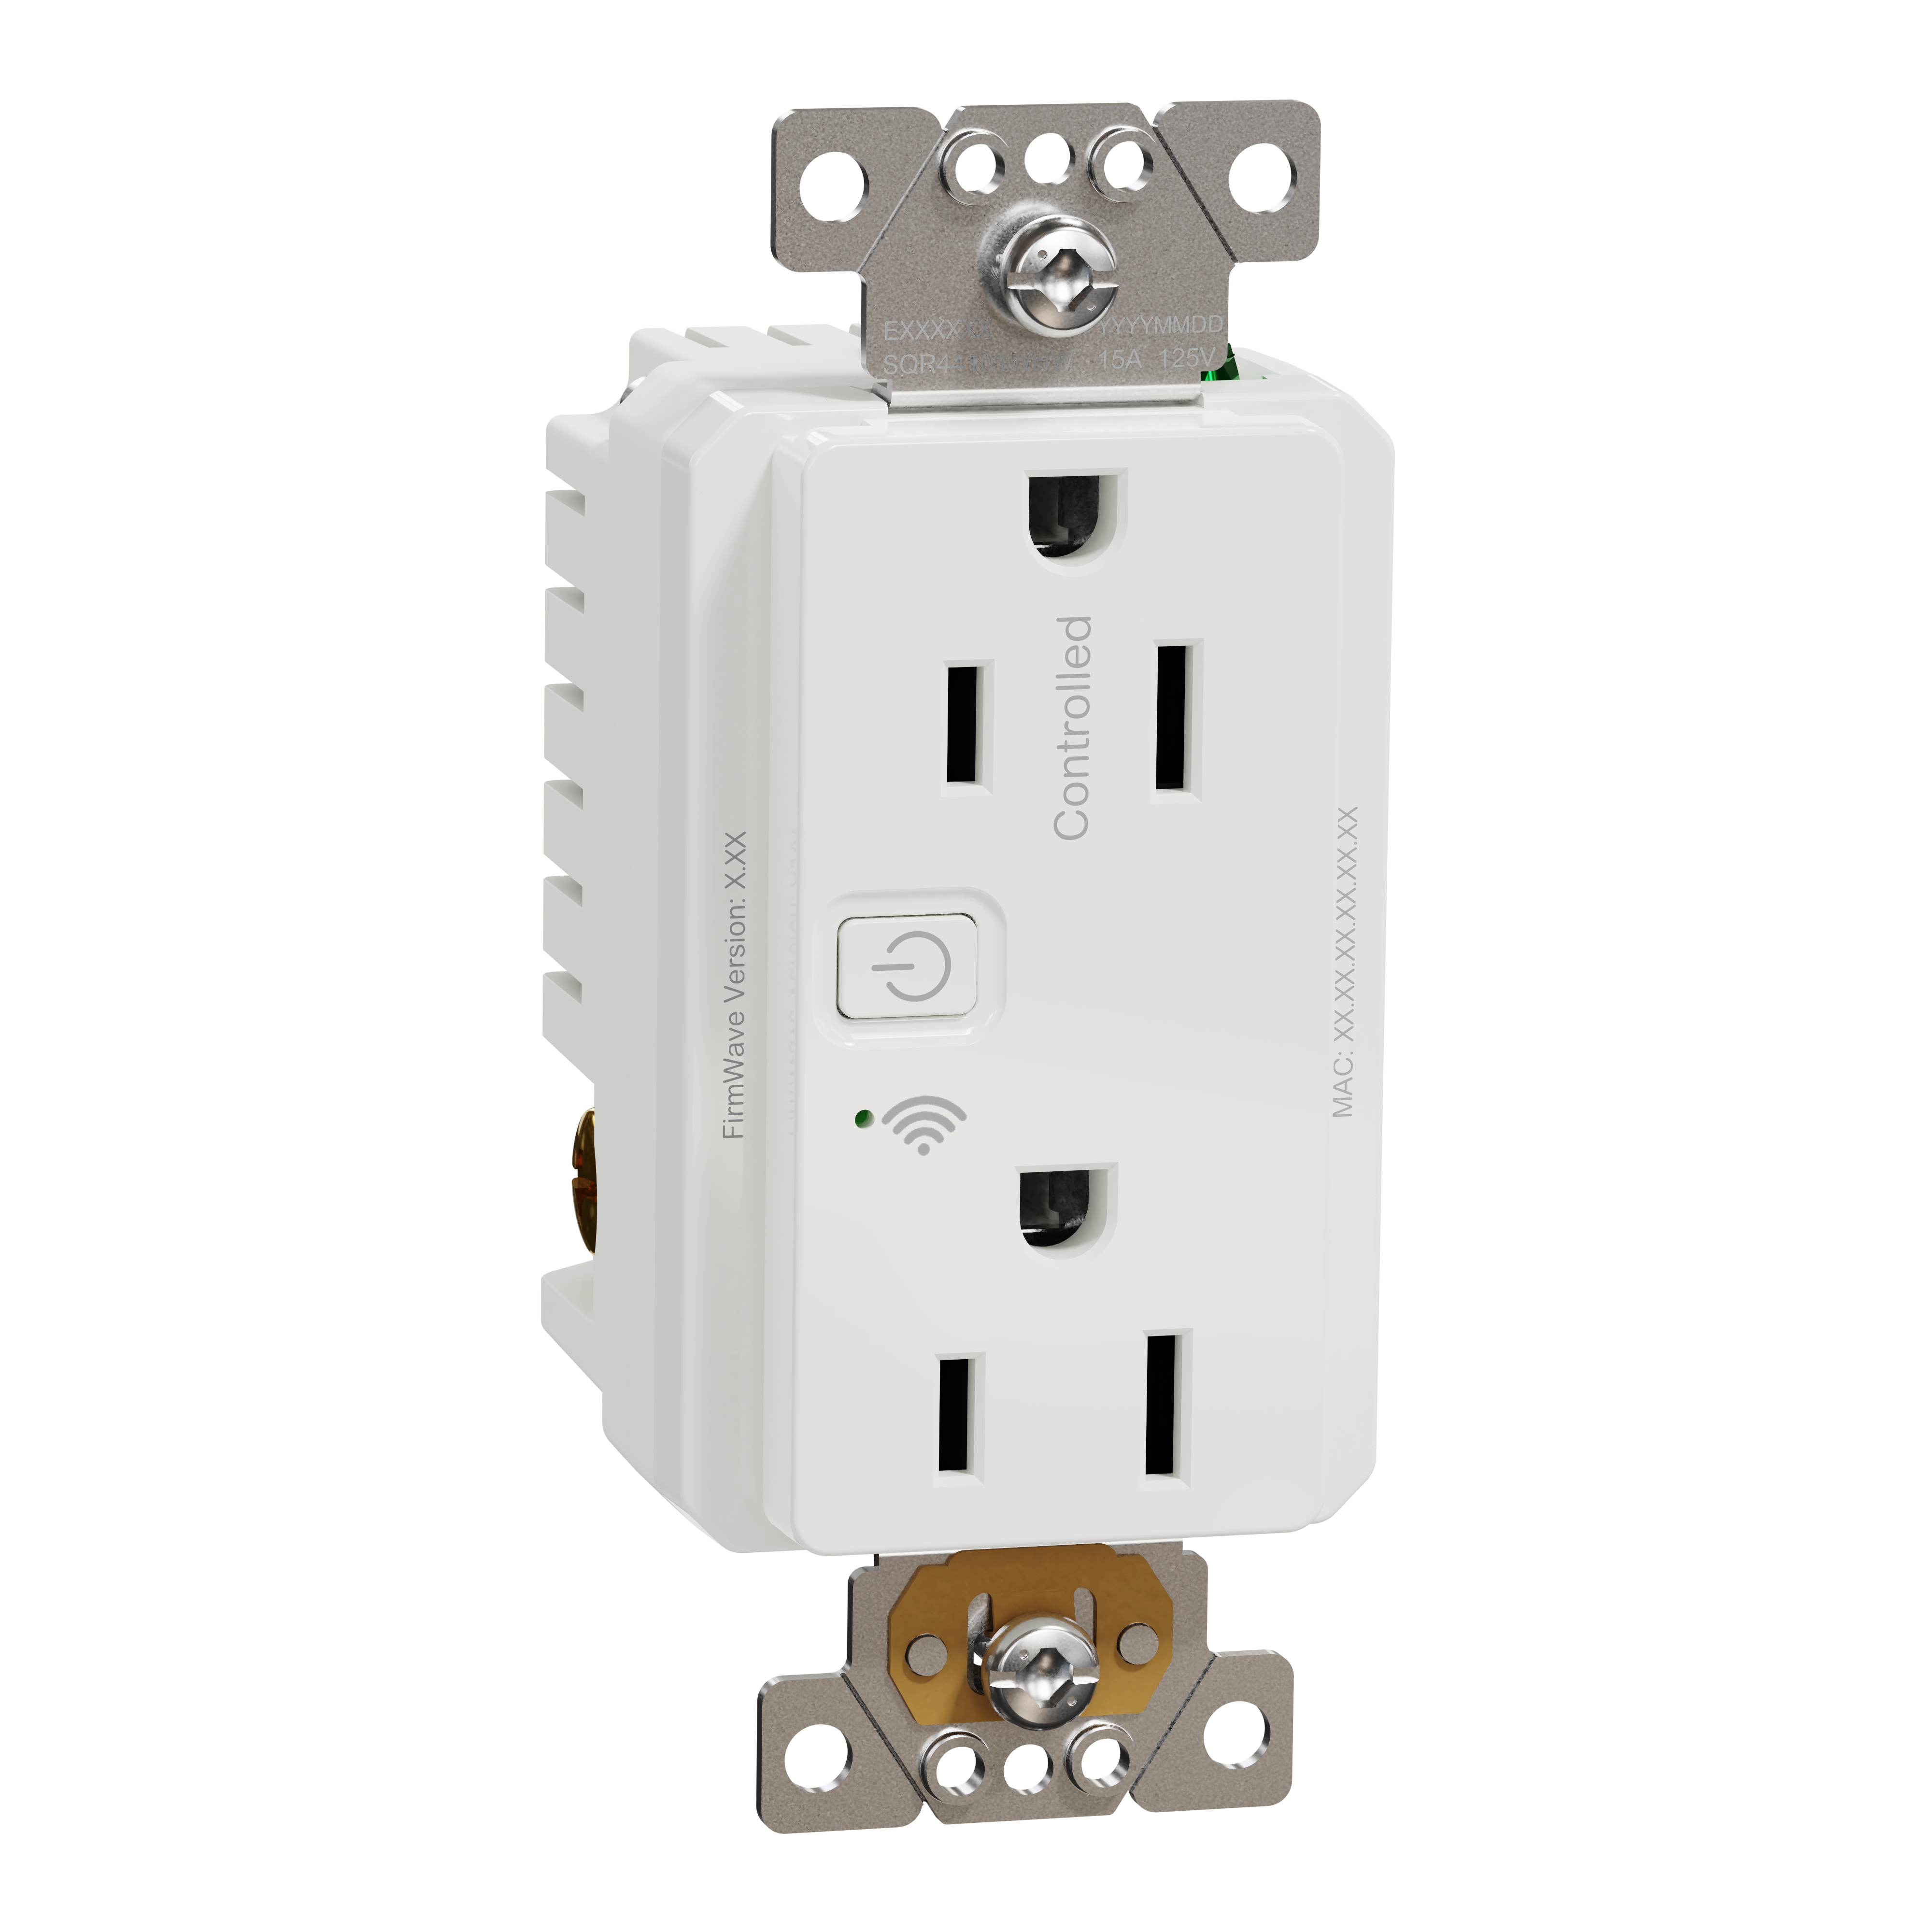 Socket-outlet, X Series, 15A, decorator, tamper resistant, WiFi connected, white, matte finish